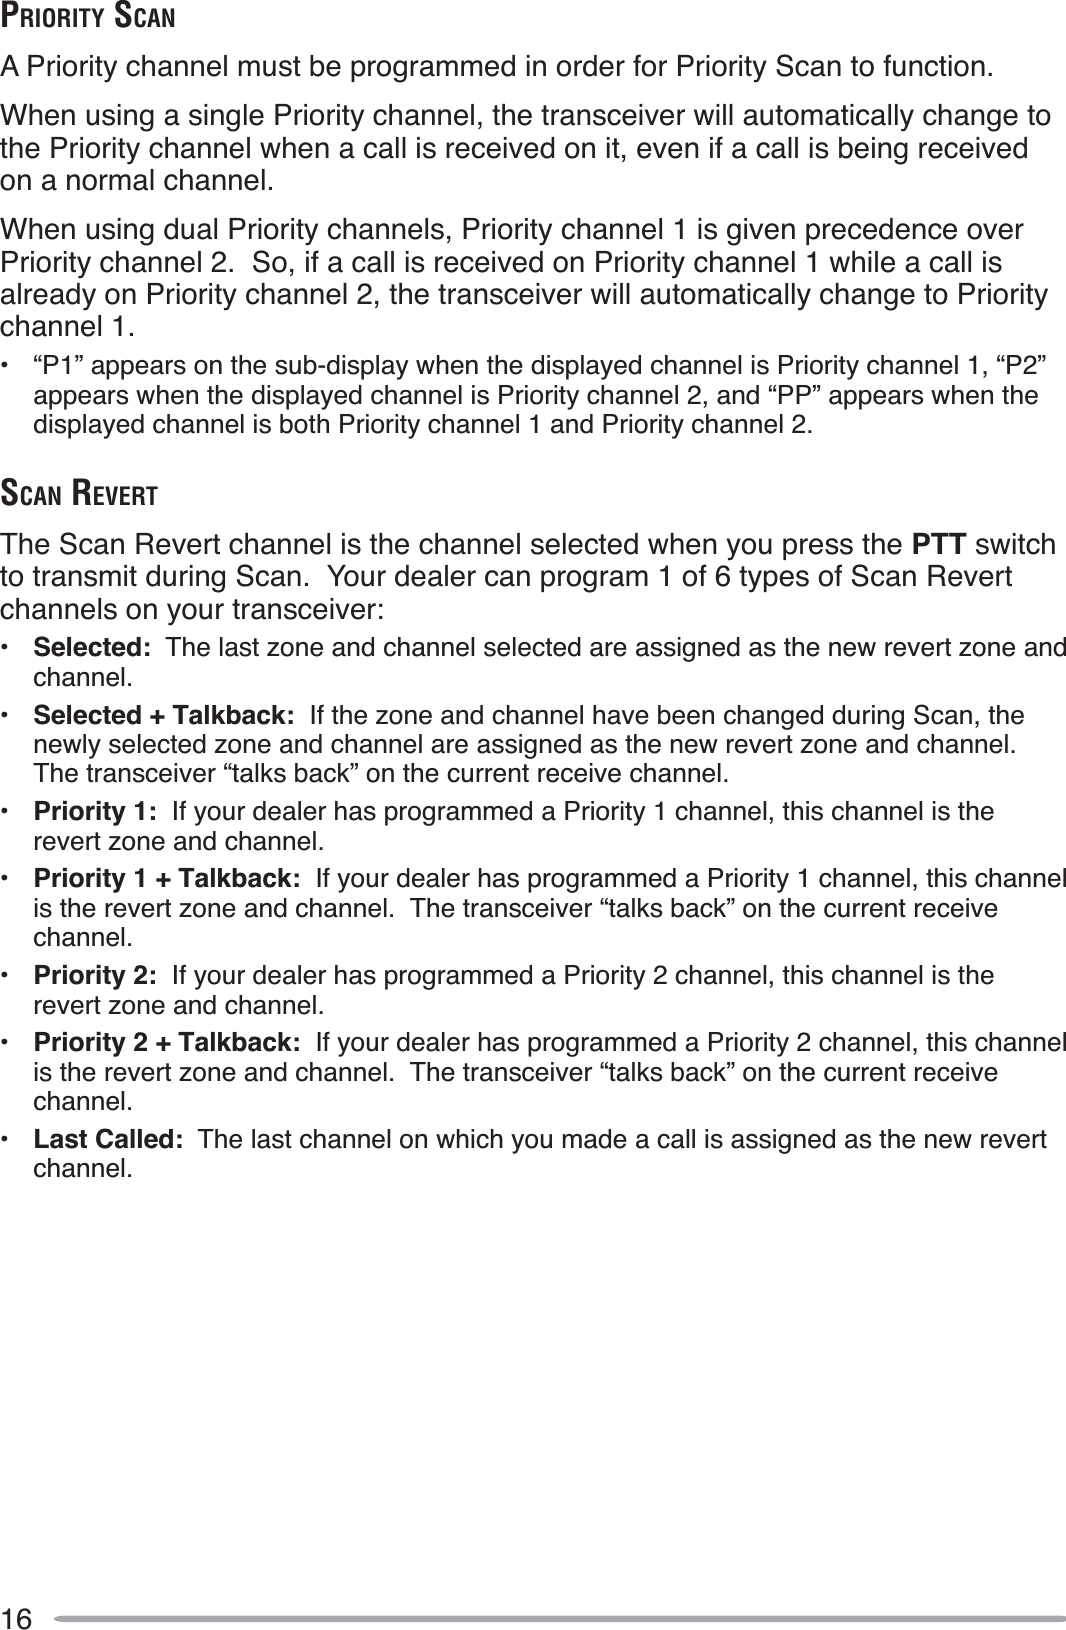 16PRIORITY SCANA Priority channel must be programmed in order for Priority Scan to function.When using a single Priority channel, the transceiver will automatically change to the Priority channel when a call is received on it, even if a call is being received on a normal channel.When using dual Priority channels, Priority channel 1 is given precedence over Priority channel 2.  So, if a call is received on Priority channel 1 while a call is already on Priority channel 2, the transceiver will automatically change to Priority channel 1.• “P1” appears on the sub-display when the displayed channel is Priority channel 1, “P2” appears when the displayed channel is Priority channel 2, and “PP” appears when the displayed channel is both Priority channel 1 and Priority channel 2.SCAN REVERTThe Scan Revert channel is the channel selected when you press the PTT switchto transmit during Scan.  Your dealer can program 1 of 6 types of Scan Revert channels on your transceiver:•Selected:  The last zone and channel selected are assigned as the new revert zone and channel.•Selected + Talkback:  If the zone and channel have been changed during Scan, the newly selected zone and channel are assigned as the new revert zone and channel.The transceiver “talks back” on the current receive channel.•Priority 1:  If your dealer has programmed a Priority 1 channel, this channel is the revert zone and channel.•Priority 1 + Talkback:  If your dealer has programmed a Priority 1 channel, this channel is the revert zone and channel.  The transceiver “talks back” on the current receive channel.•Priority 2:  If your dealer has programmed a Priority 2 channel, this channel is the revert zone and channel.•Priority 2 + Talkback:  If your dealer has programmed a Priority 2 channel, this channel is the revert zone and channel.  The transceiver “talks back” on the current receive channel.•Last Called:  The last channel on which you made a call is assigned as the new revert channel.